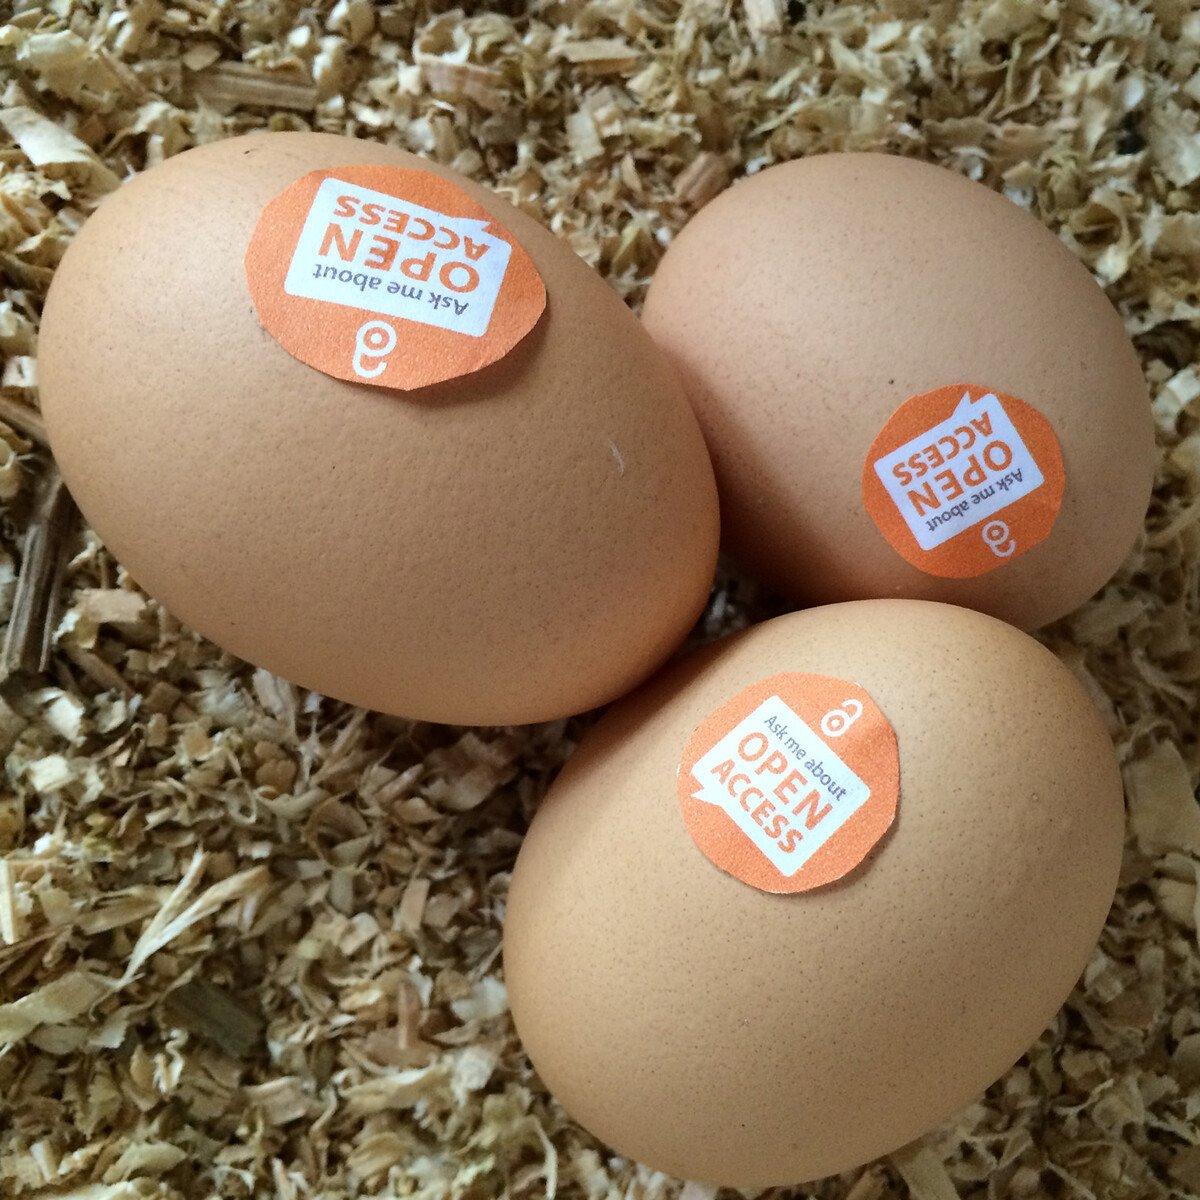 Eggs with 'ask me about open access' labels